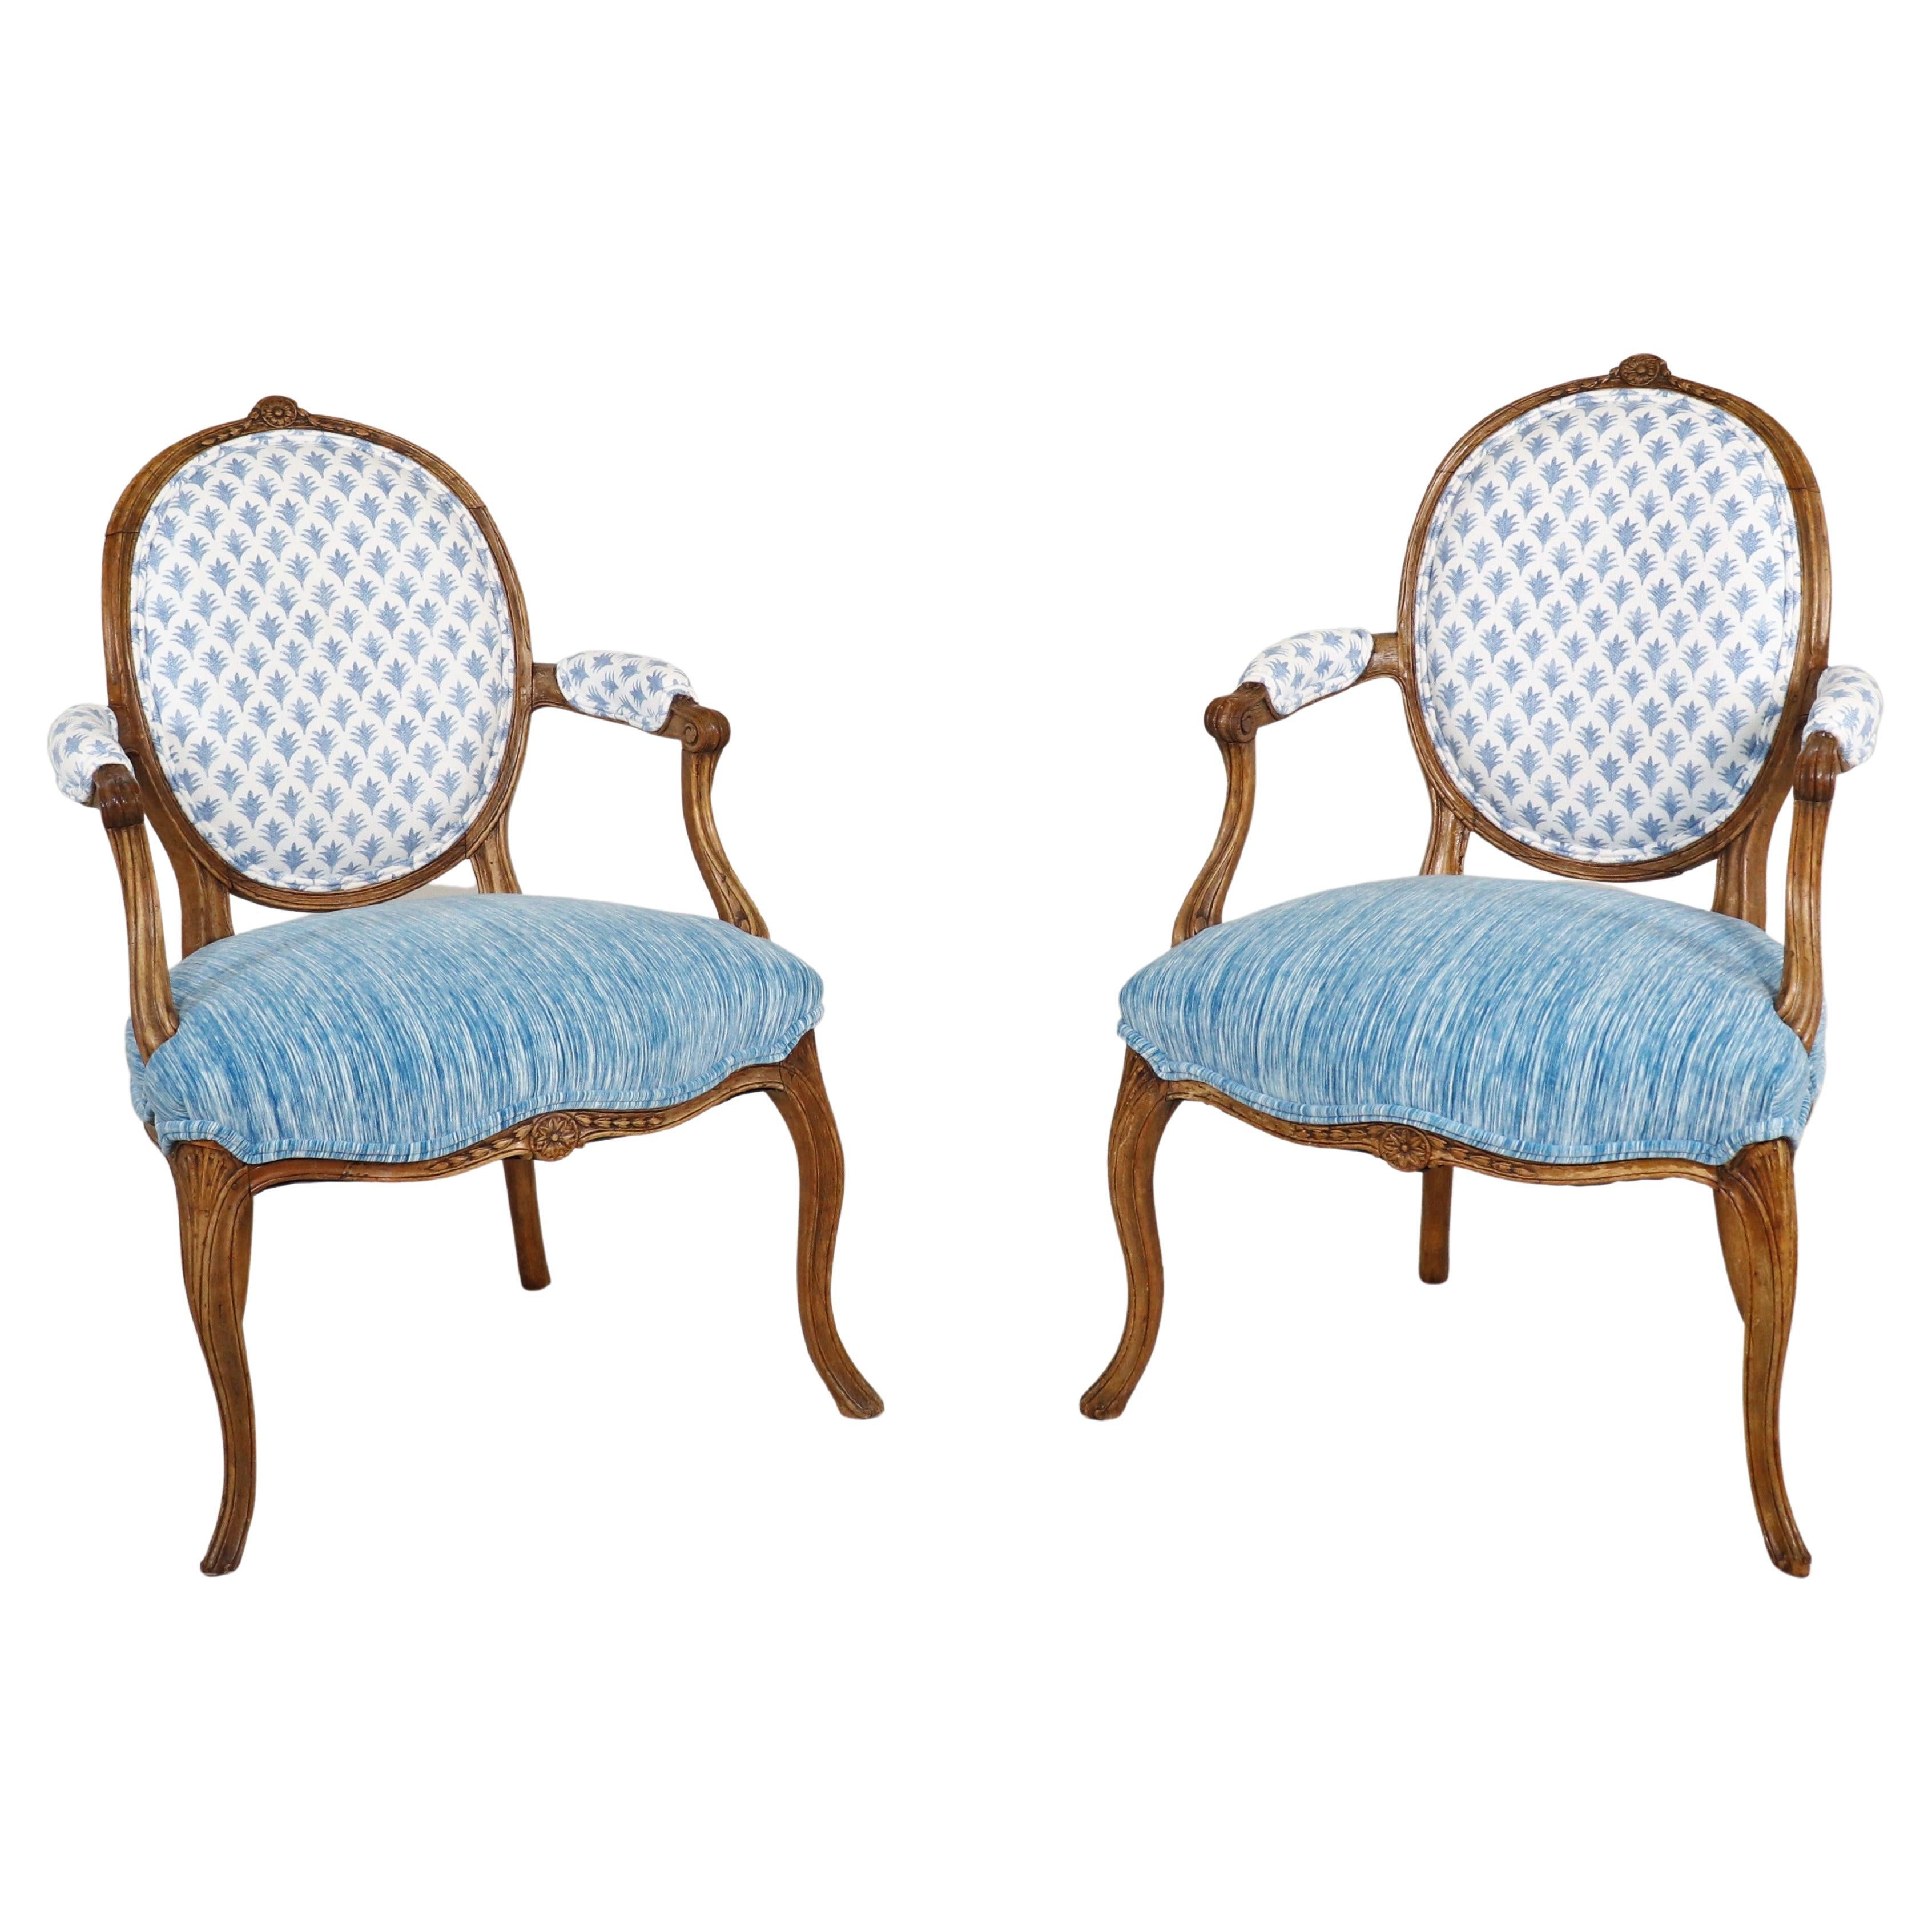 Pair of Mid-19th Century French Régence Style Fauteuils with Modern Fabrics For Sale